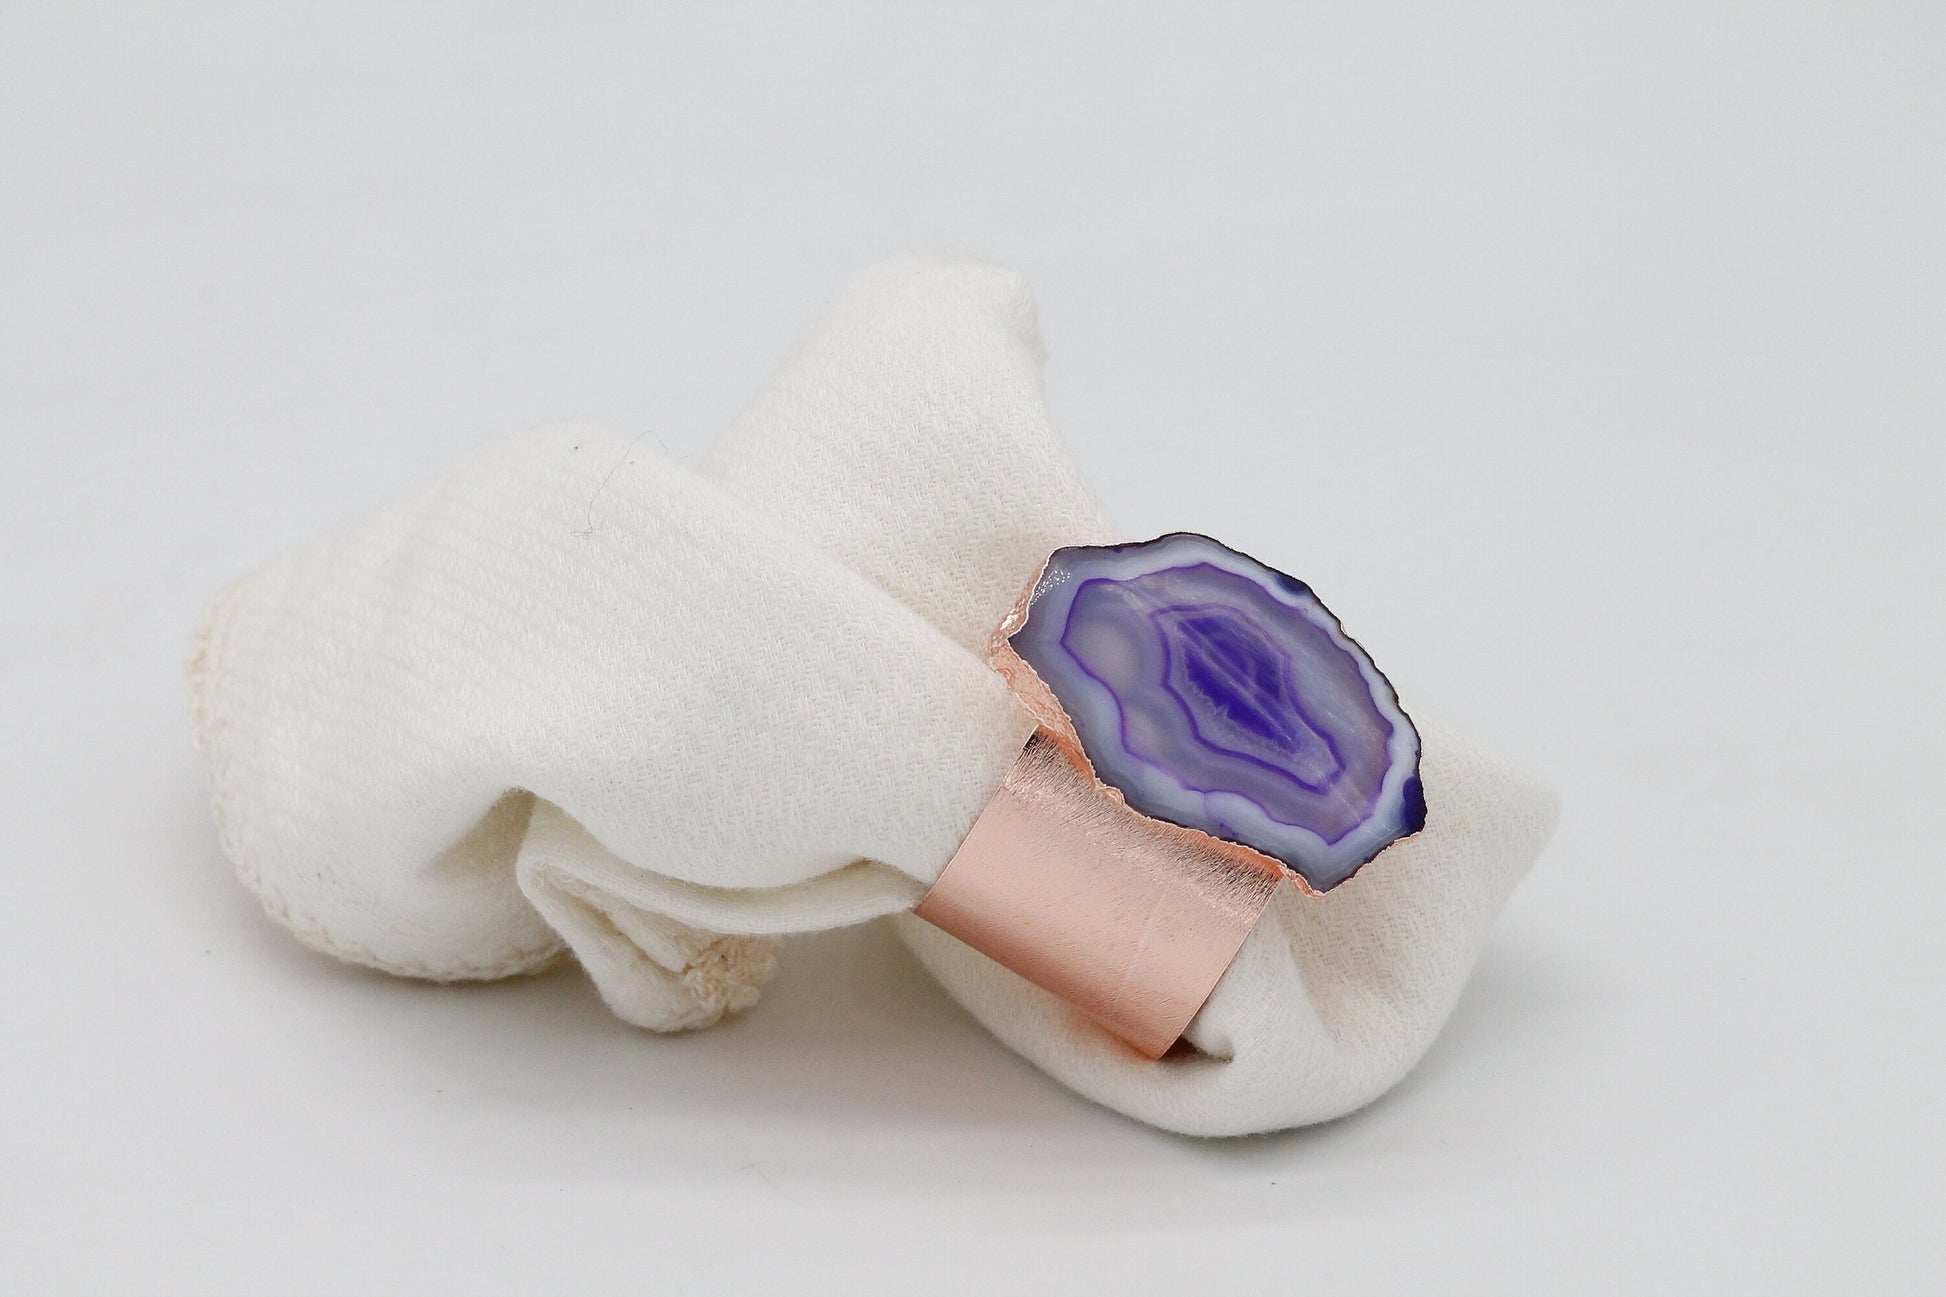 Chic Napkin Ring, Natural Gemstone Agate Handmade, Home And Table Decor Set of 4/6/12 or More - Meena Design